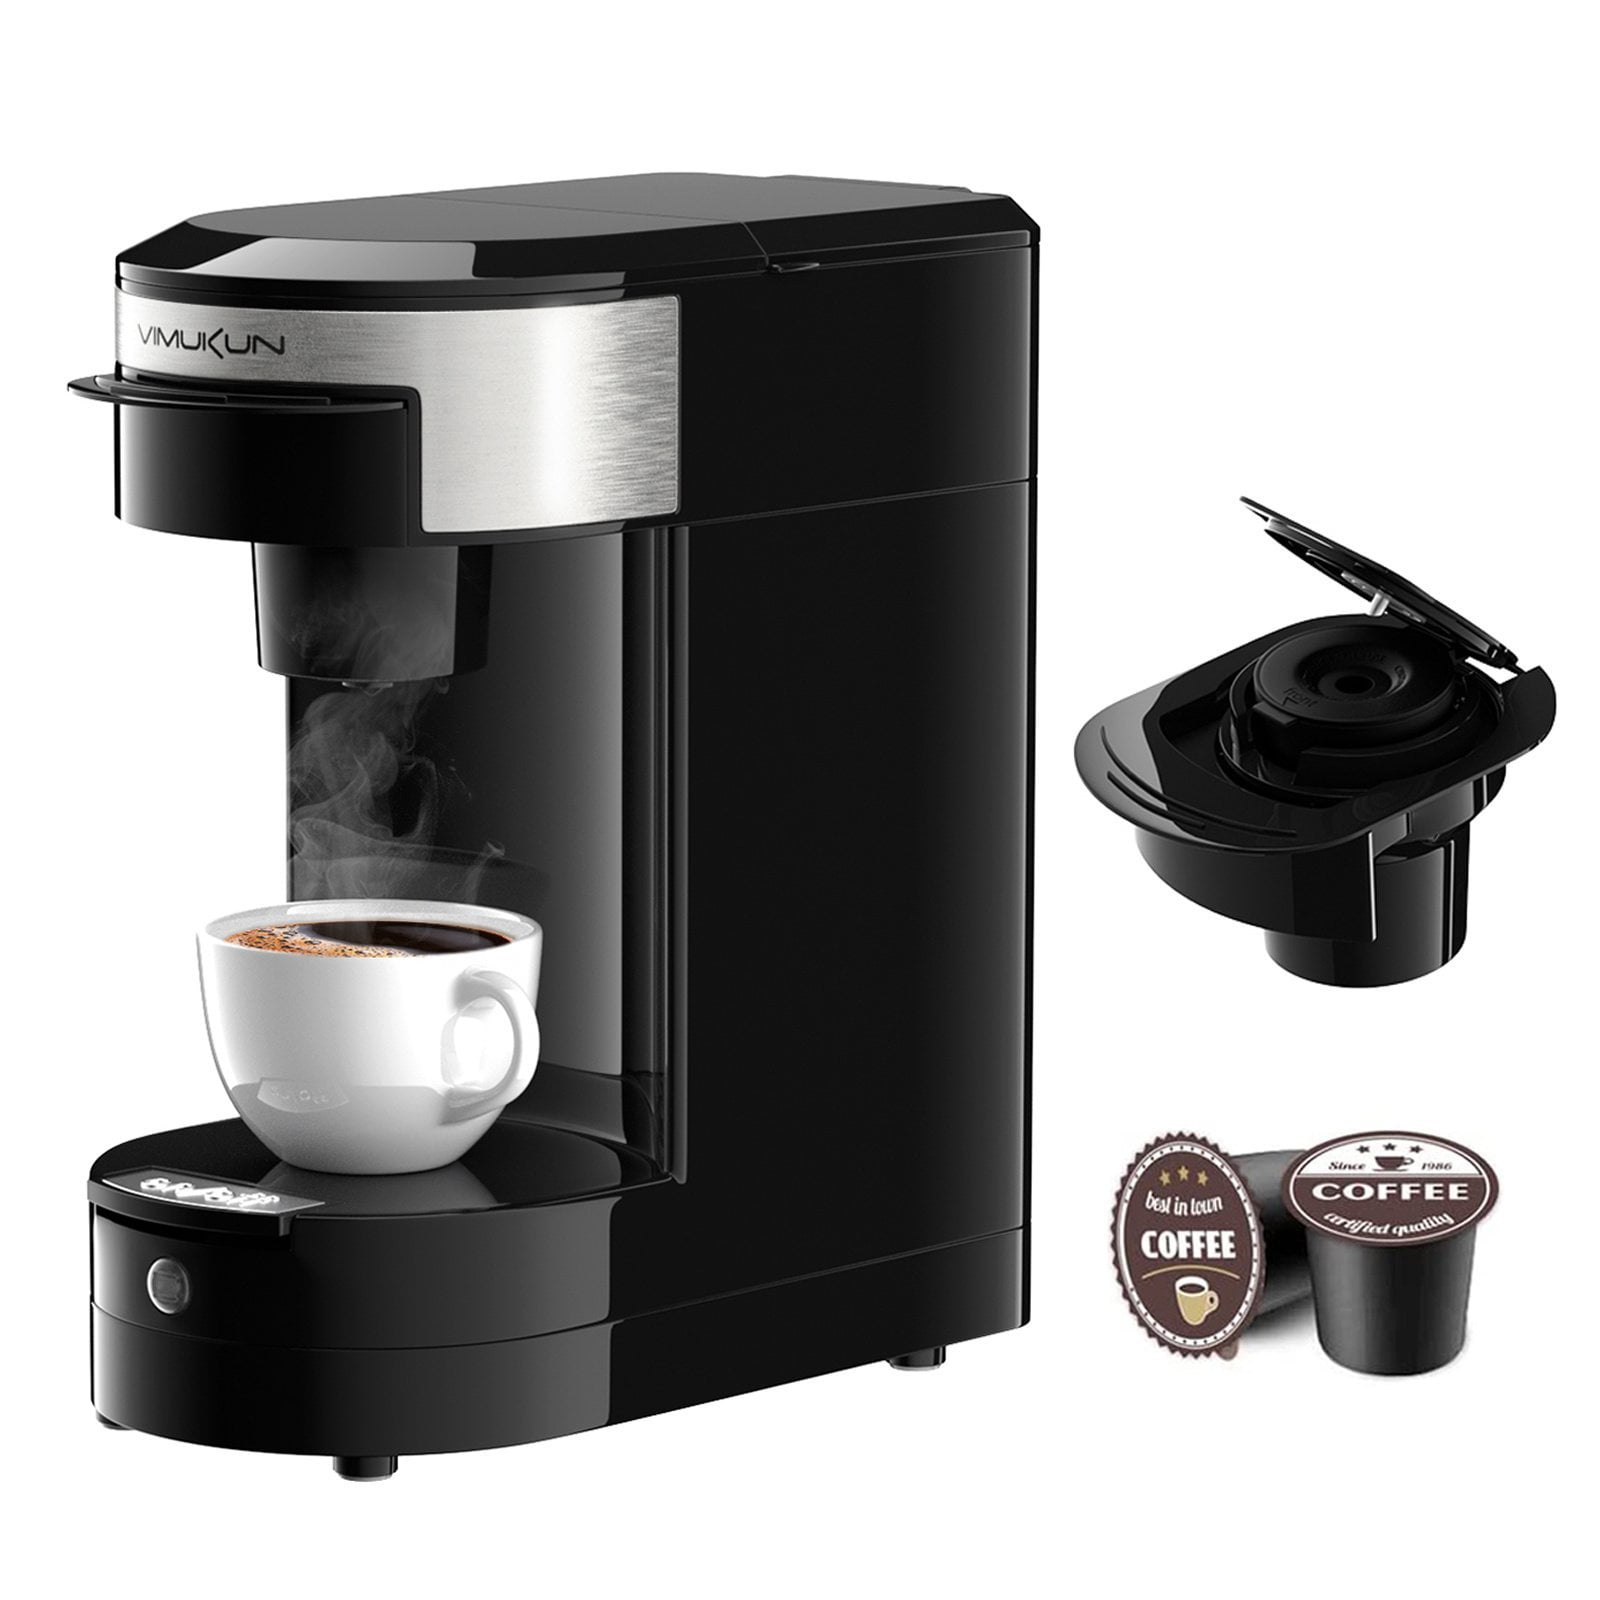 Vimukun Single Serve Coffee Maker, Single Cup Coffee Maker for K-Cup Pods  and Ground Coffee, One Cup Coffee Machine with 6 to 14oz Reservoir, Small